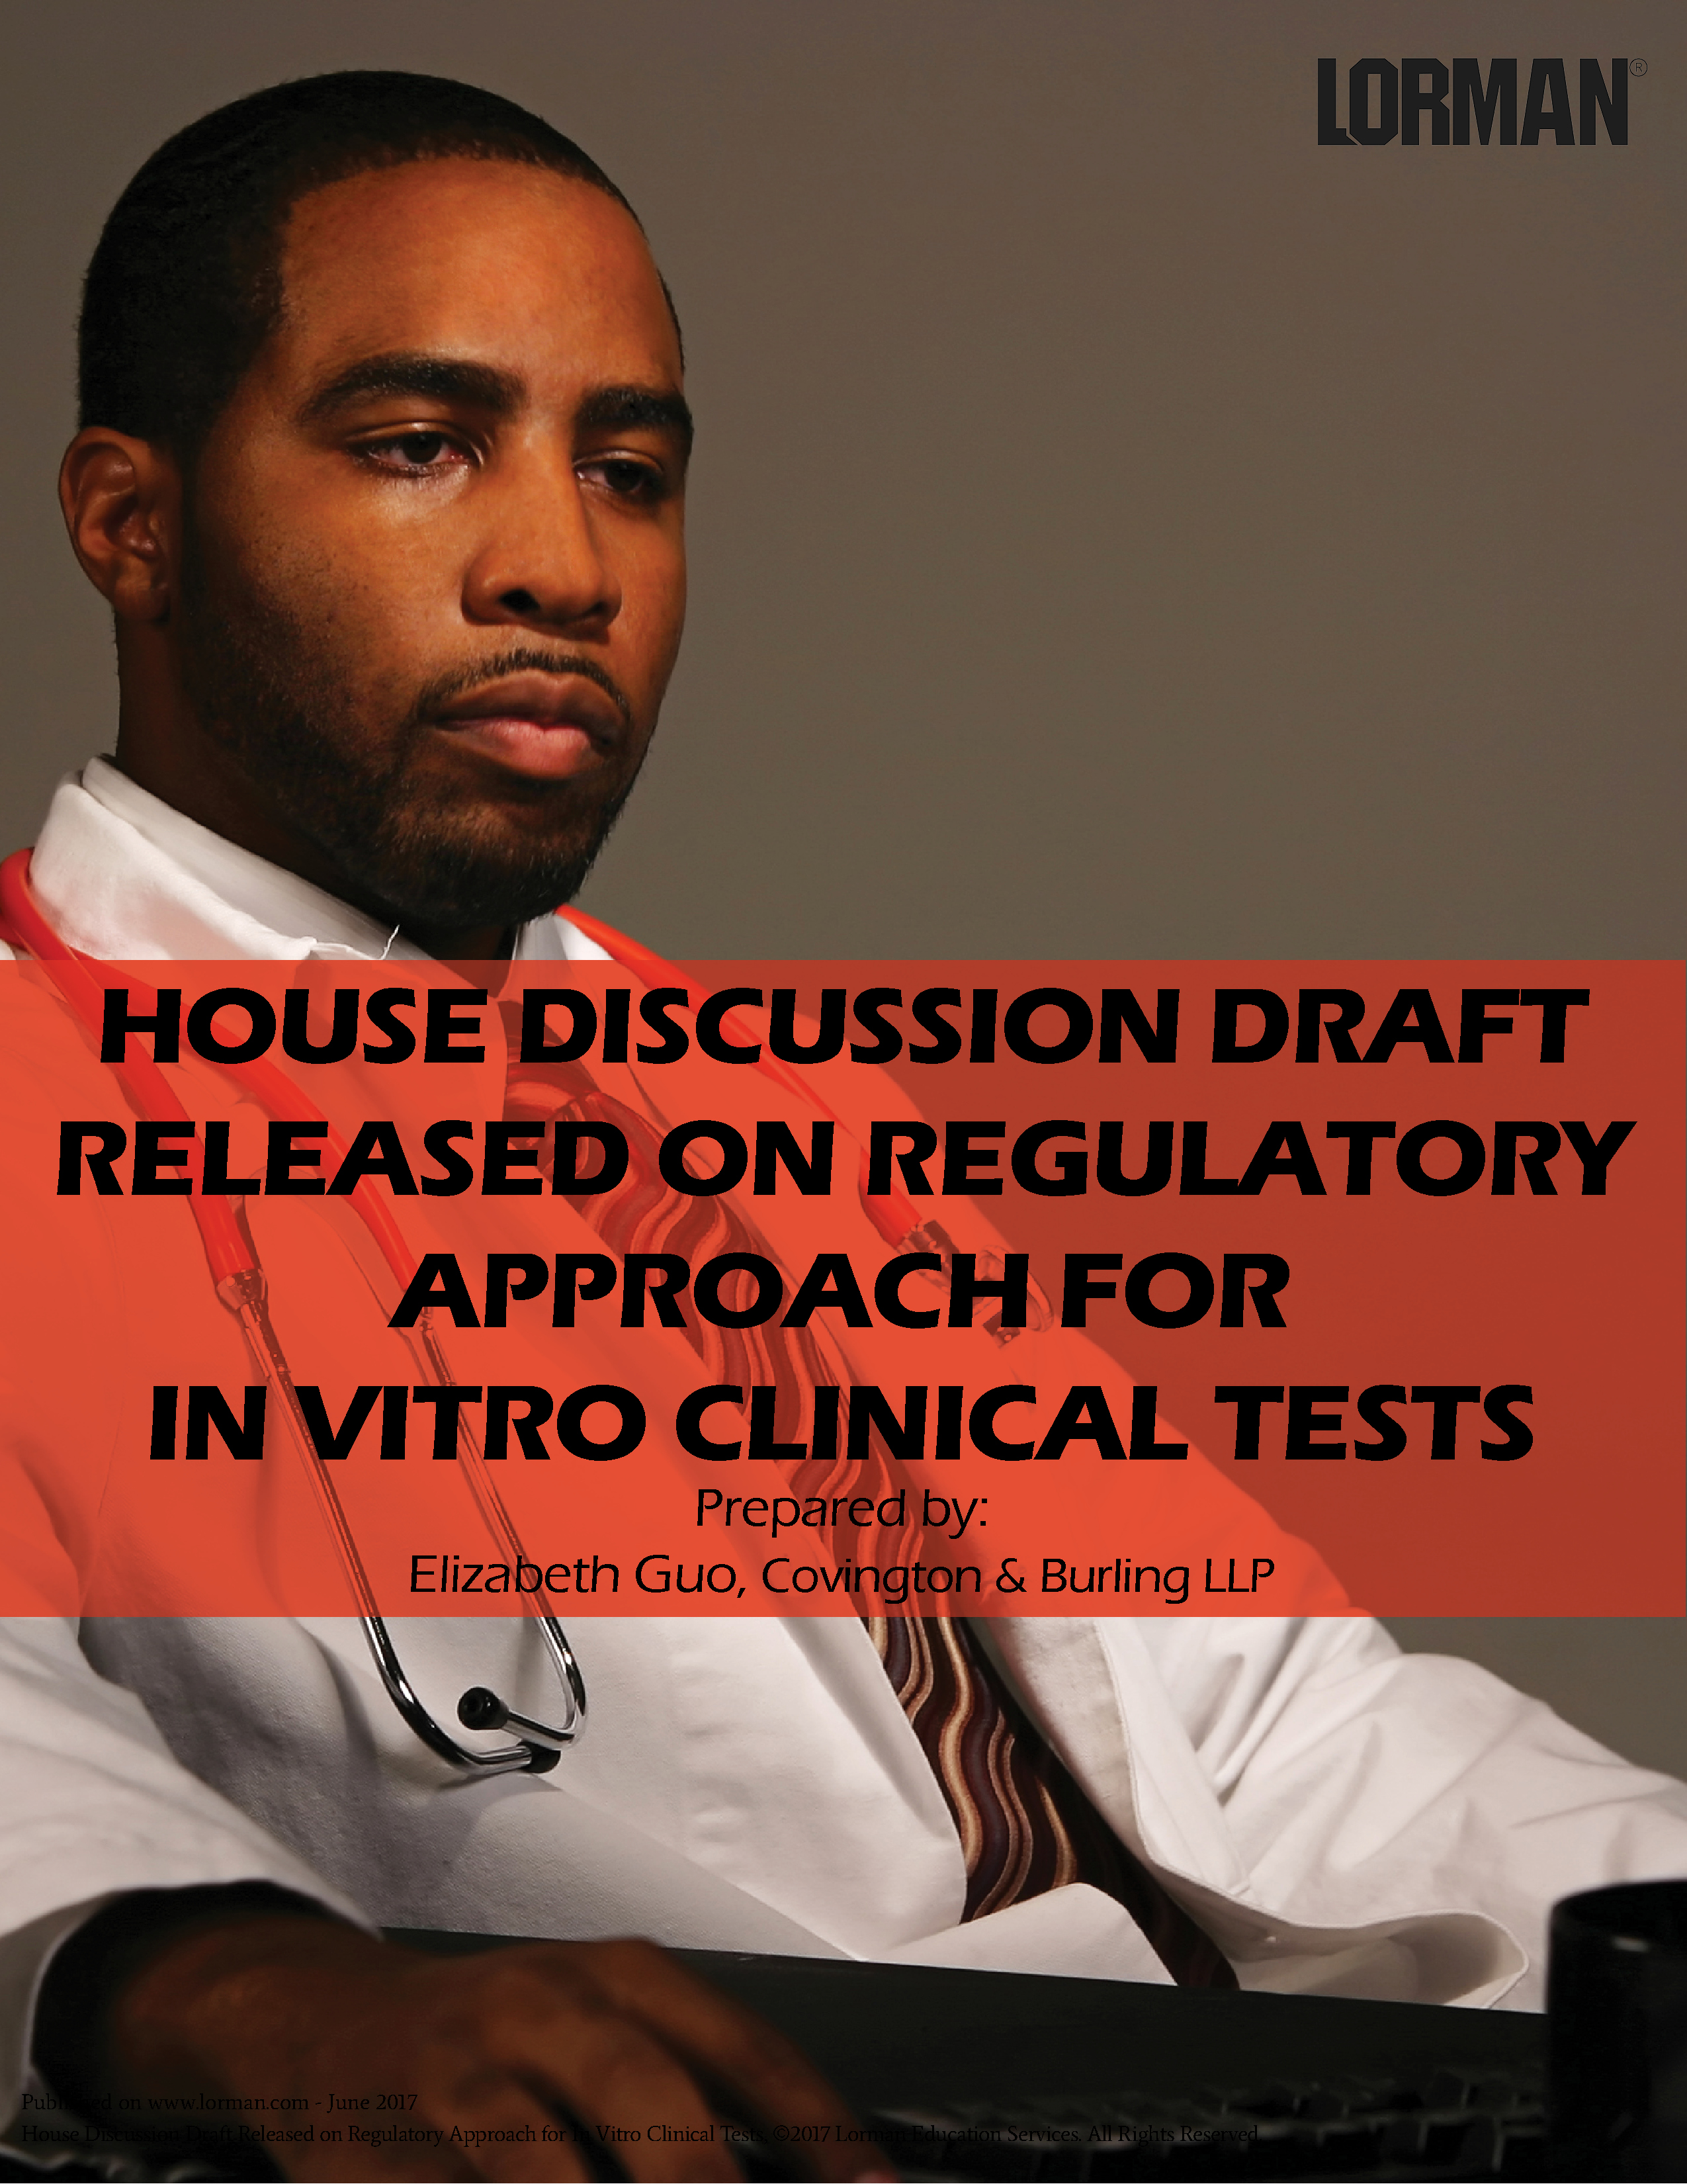 House Discussion Draft Released on Regulatory Approach for In Vitro Clinical Tests